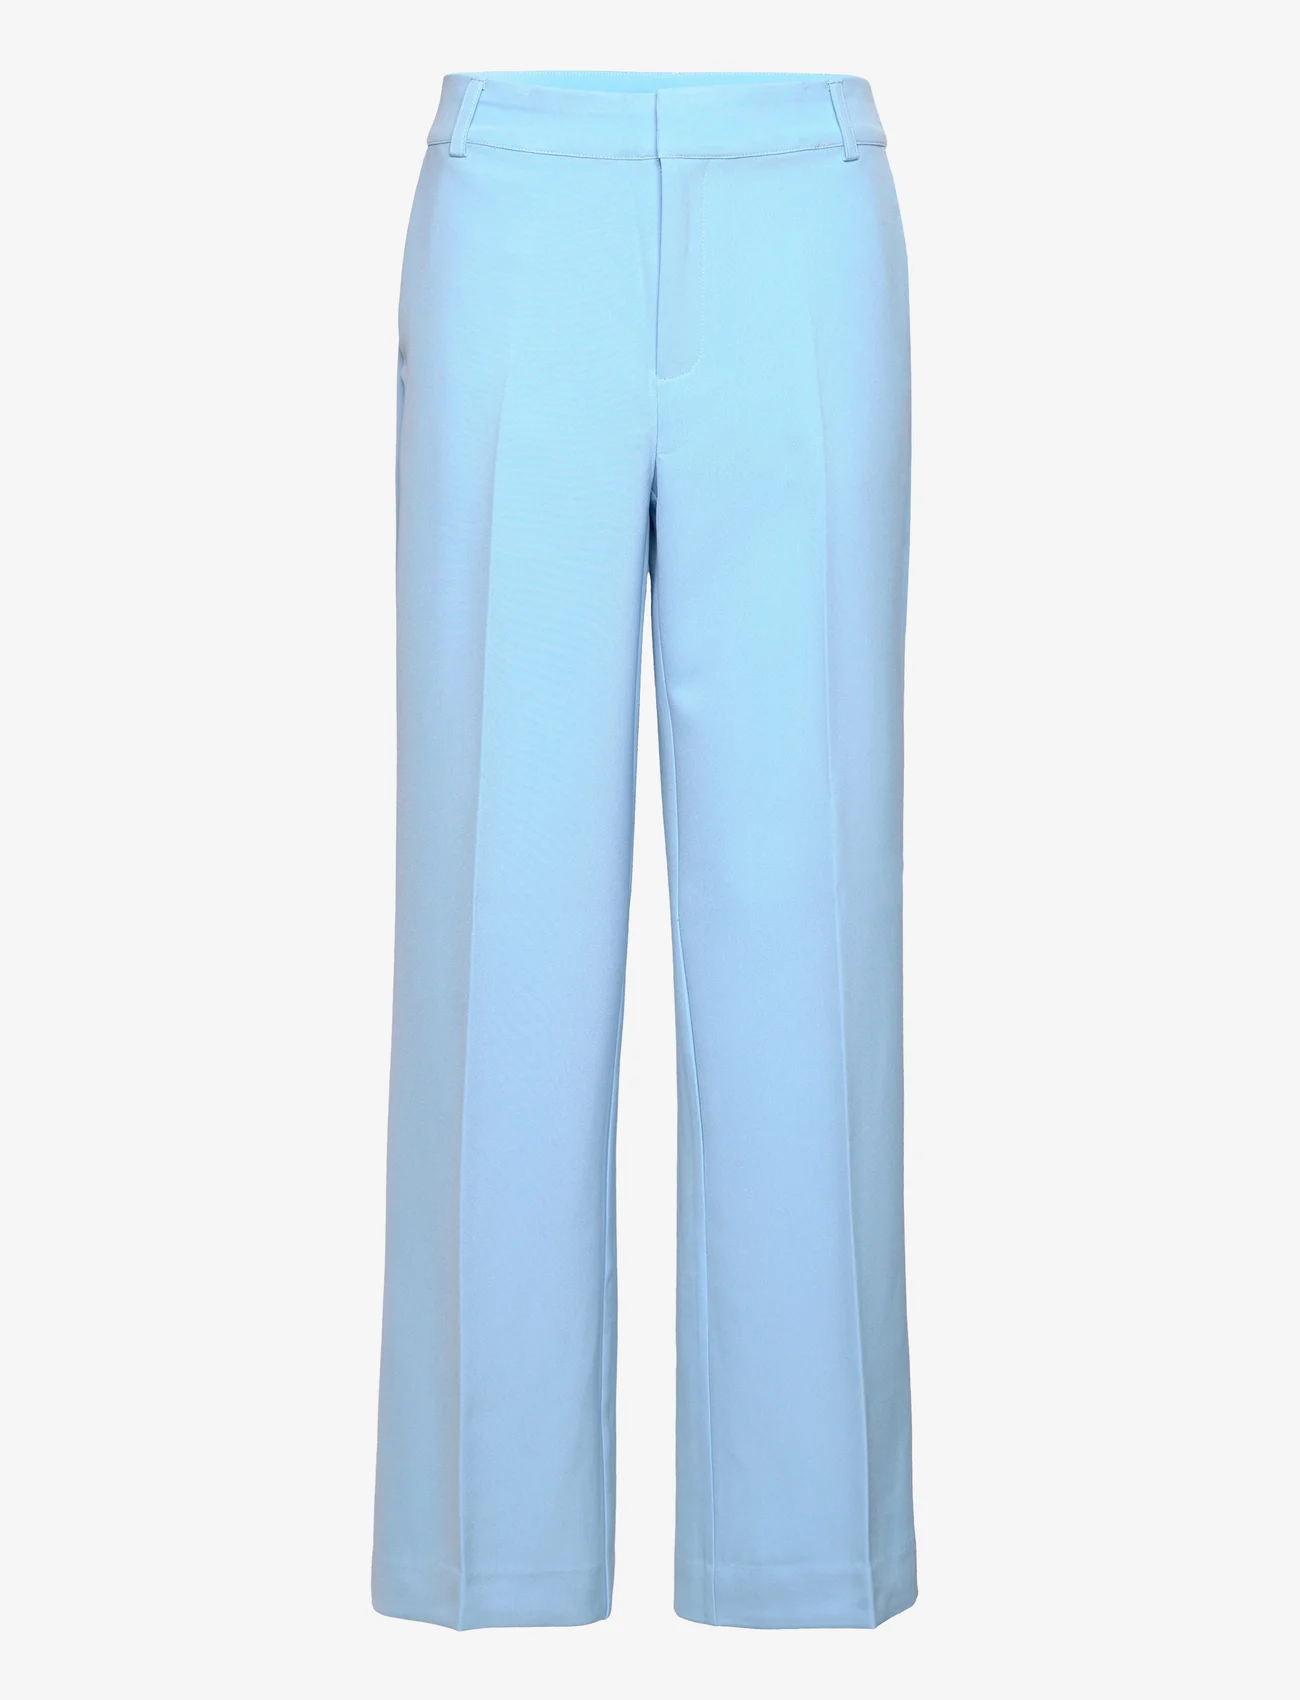 My Essential Wardrobe - 29 THE TAILORED PANT - puvunhousut - airy blue - 0